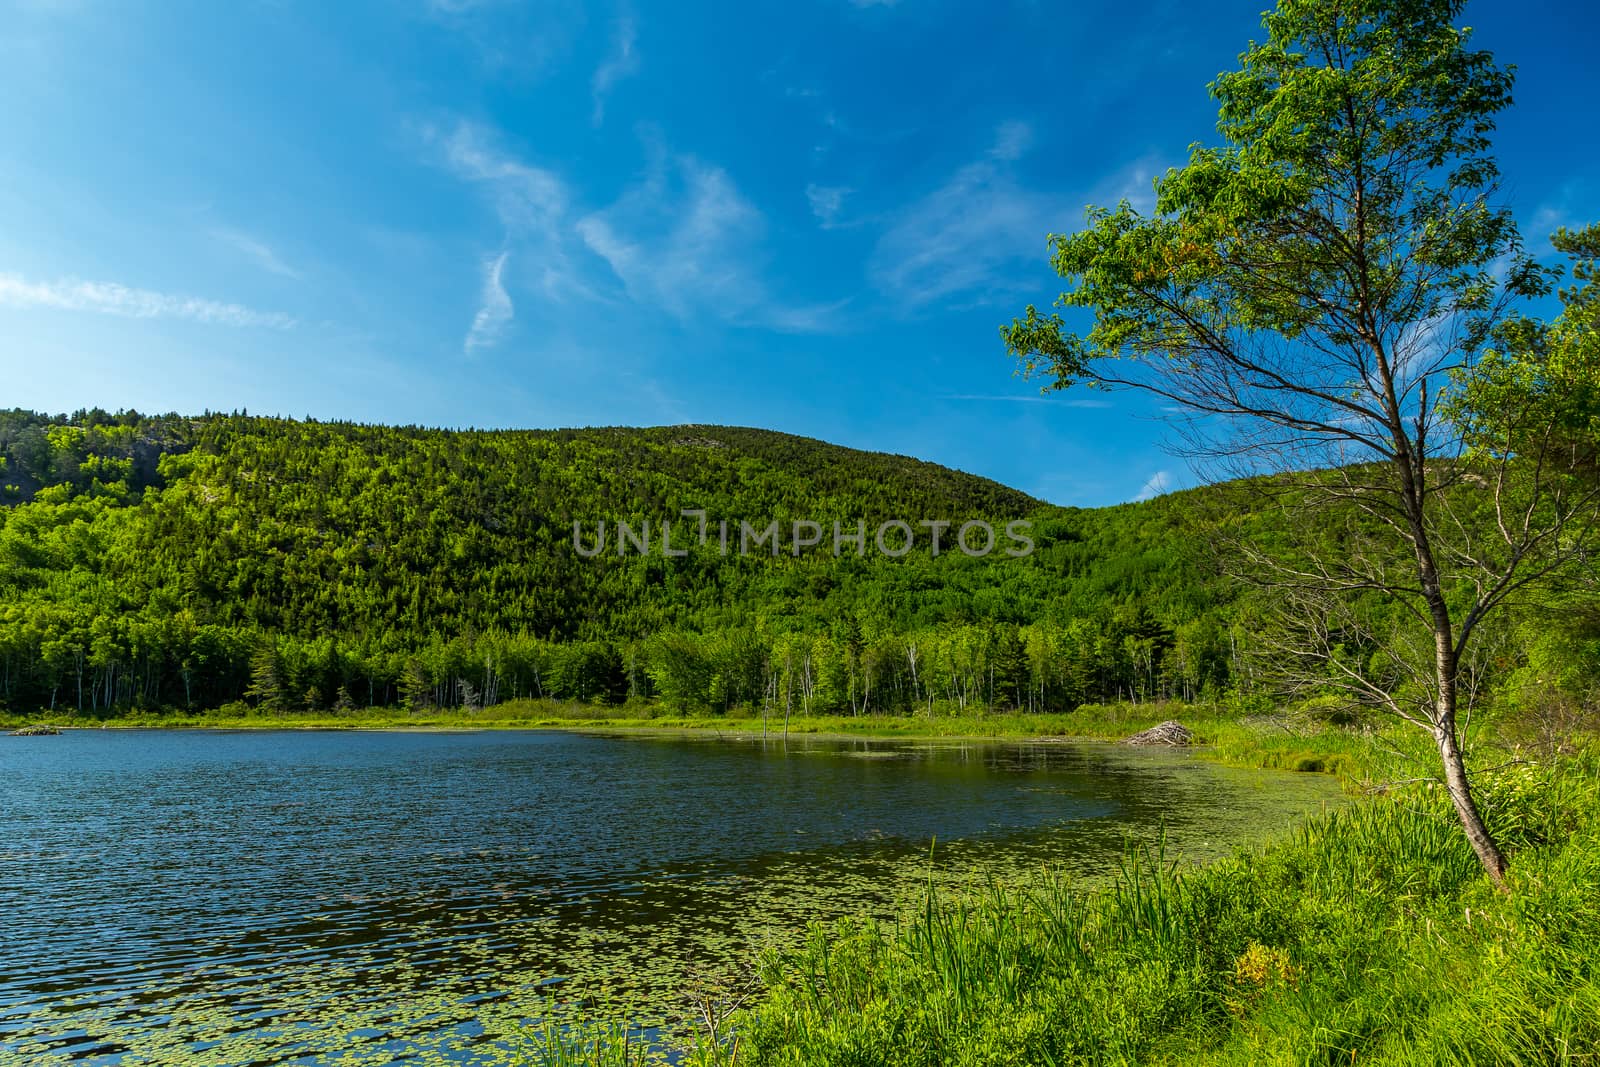 A beaver lodge sits along the shoreline on Beaver Dam Pond in Acadia National Park, Maine. The lodge has underwater entrances, making nearly impossible for any other animal.